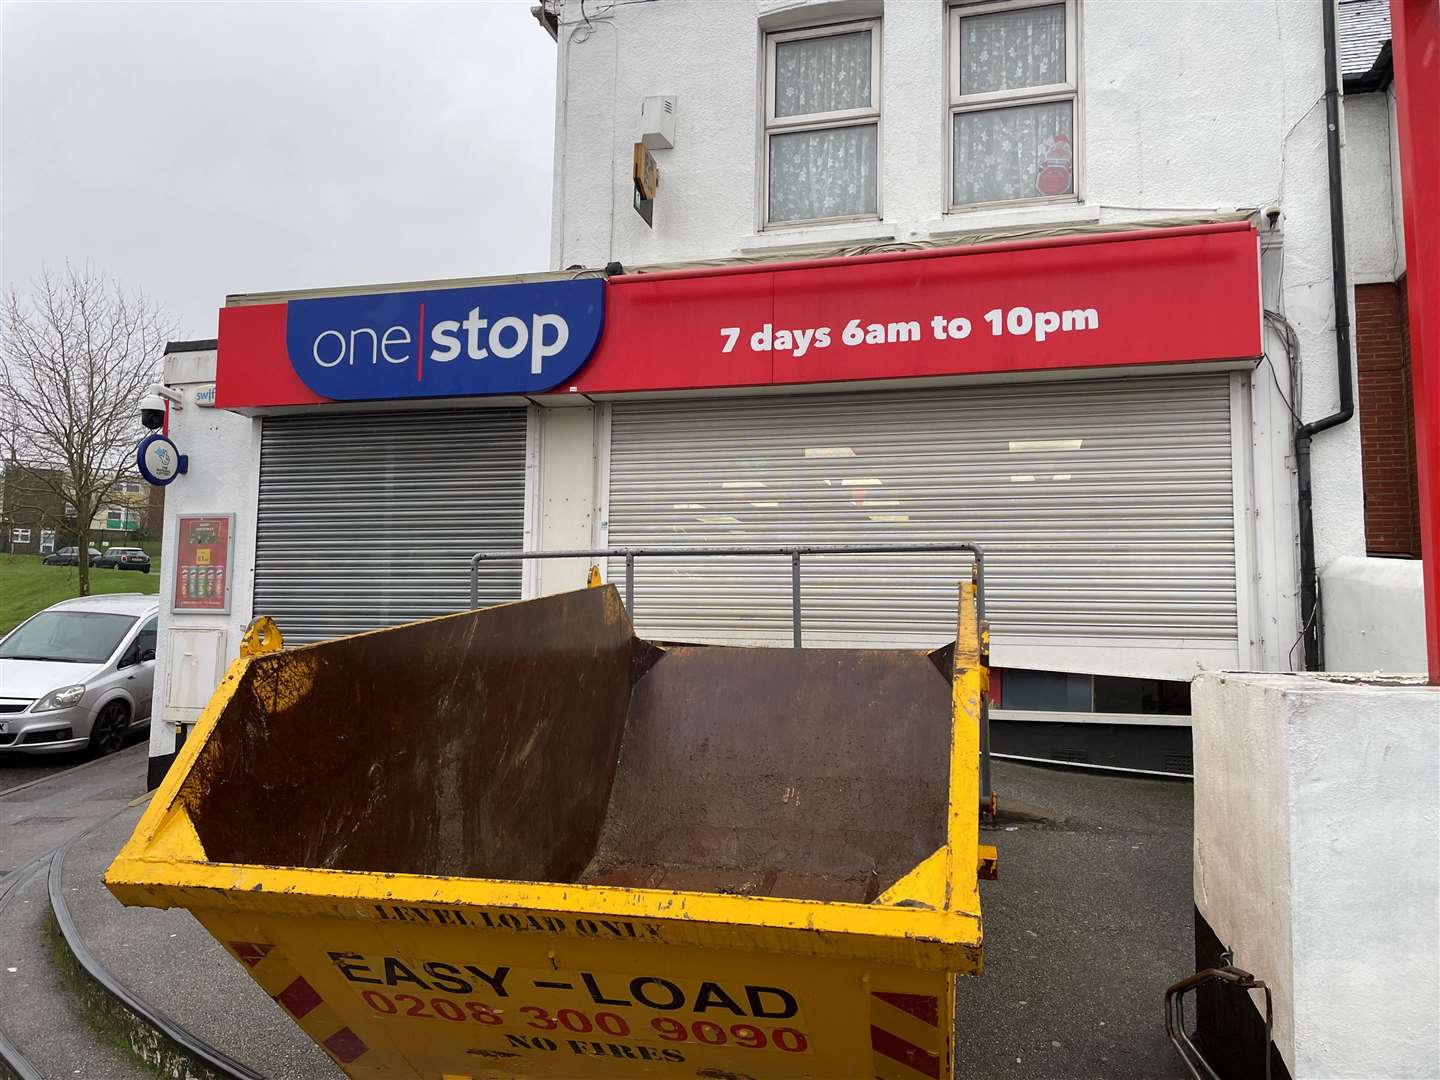 One Stop is closed